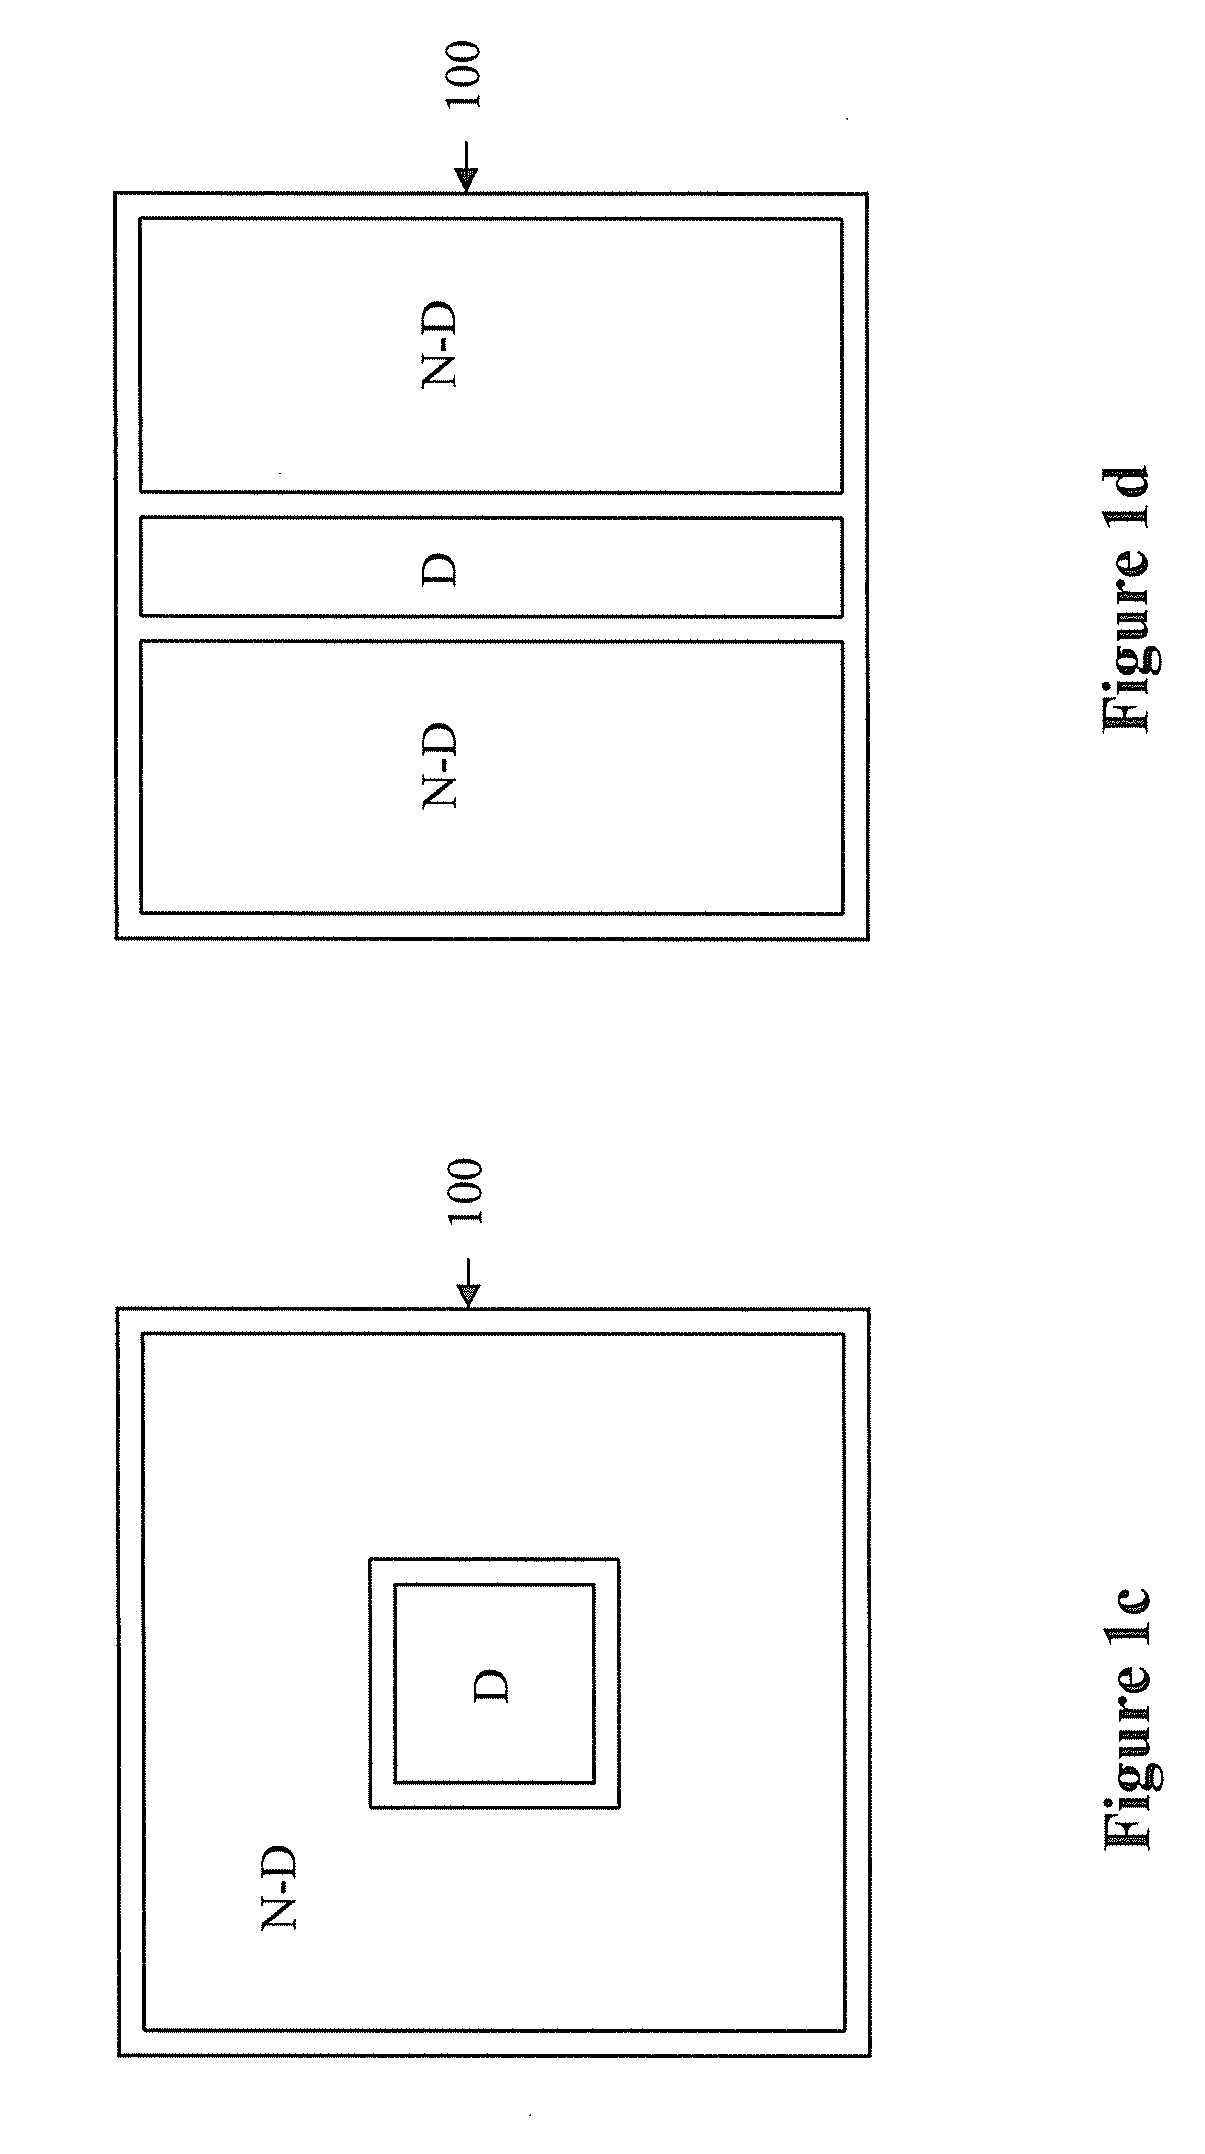 Color display devices